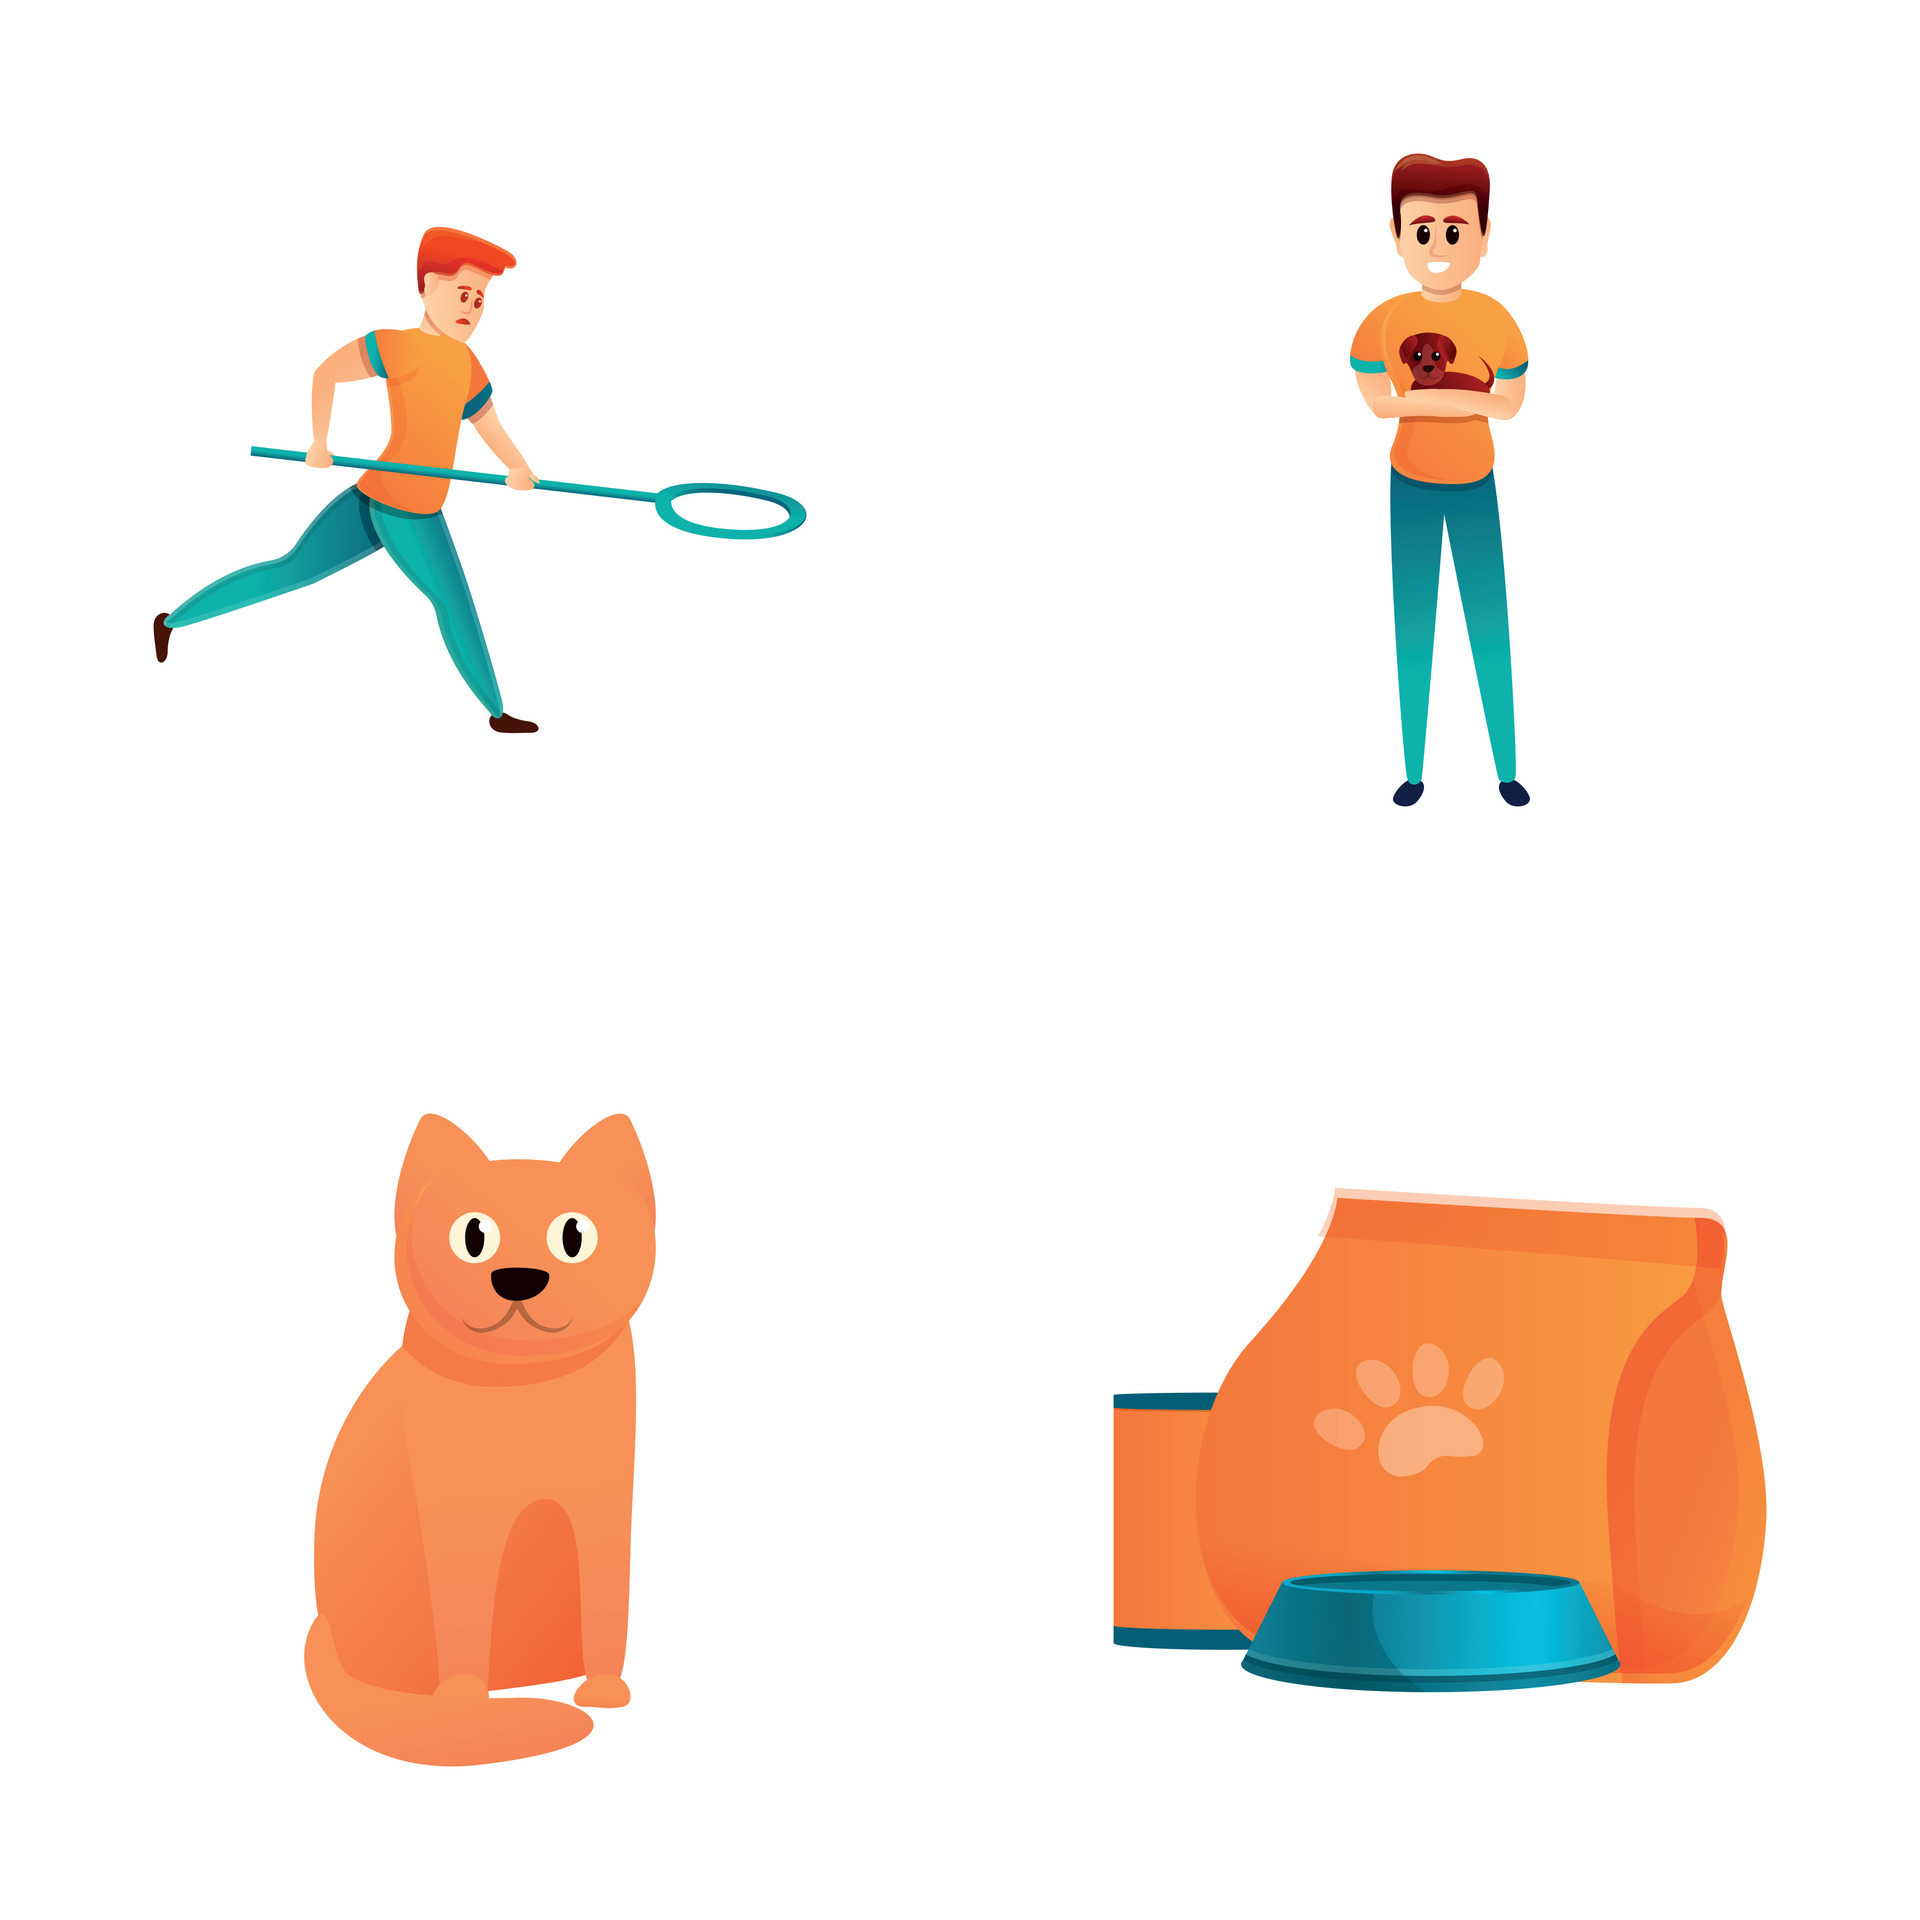 https://static.vecteezy.com/system/resources/previews/034/811/084/original/animal-capture-icons-set-cartoon-young-man-with-net-cat-and-dog-vector.jpg